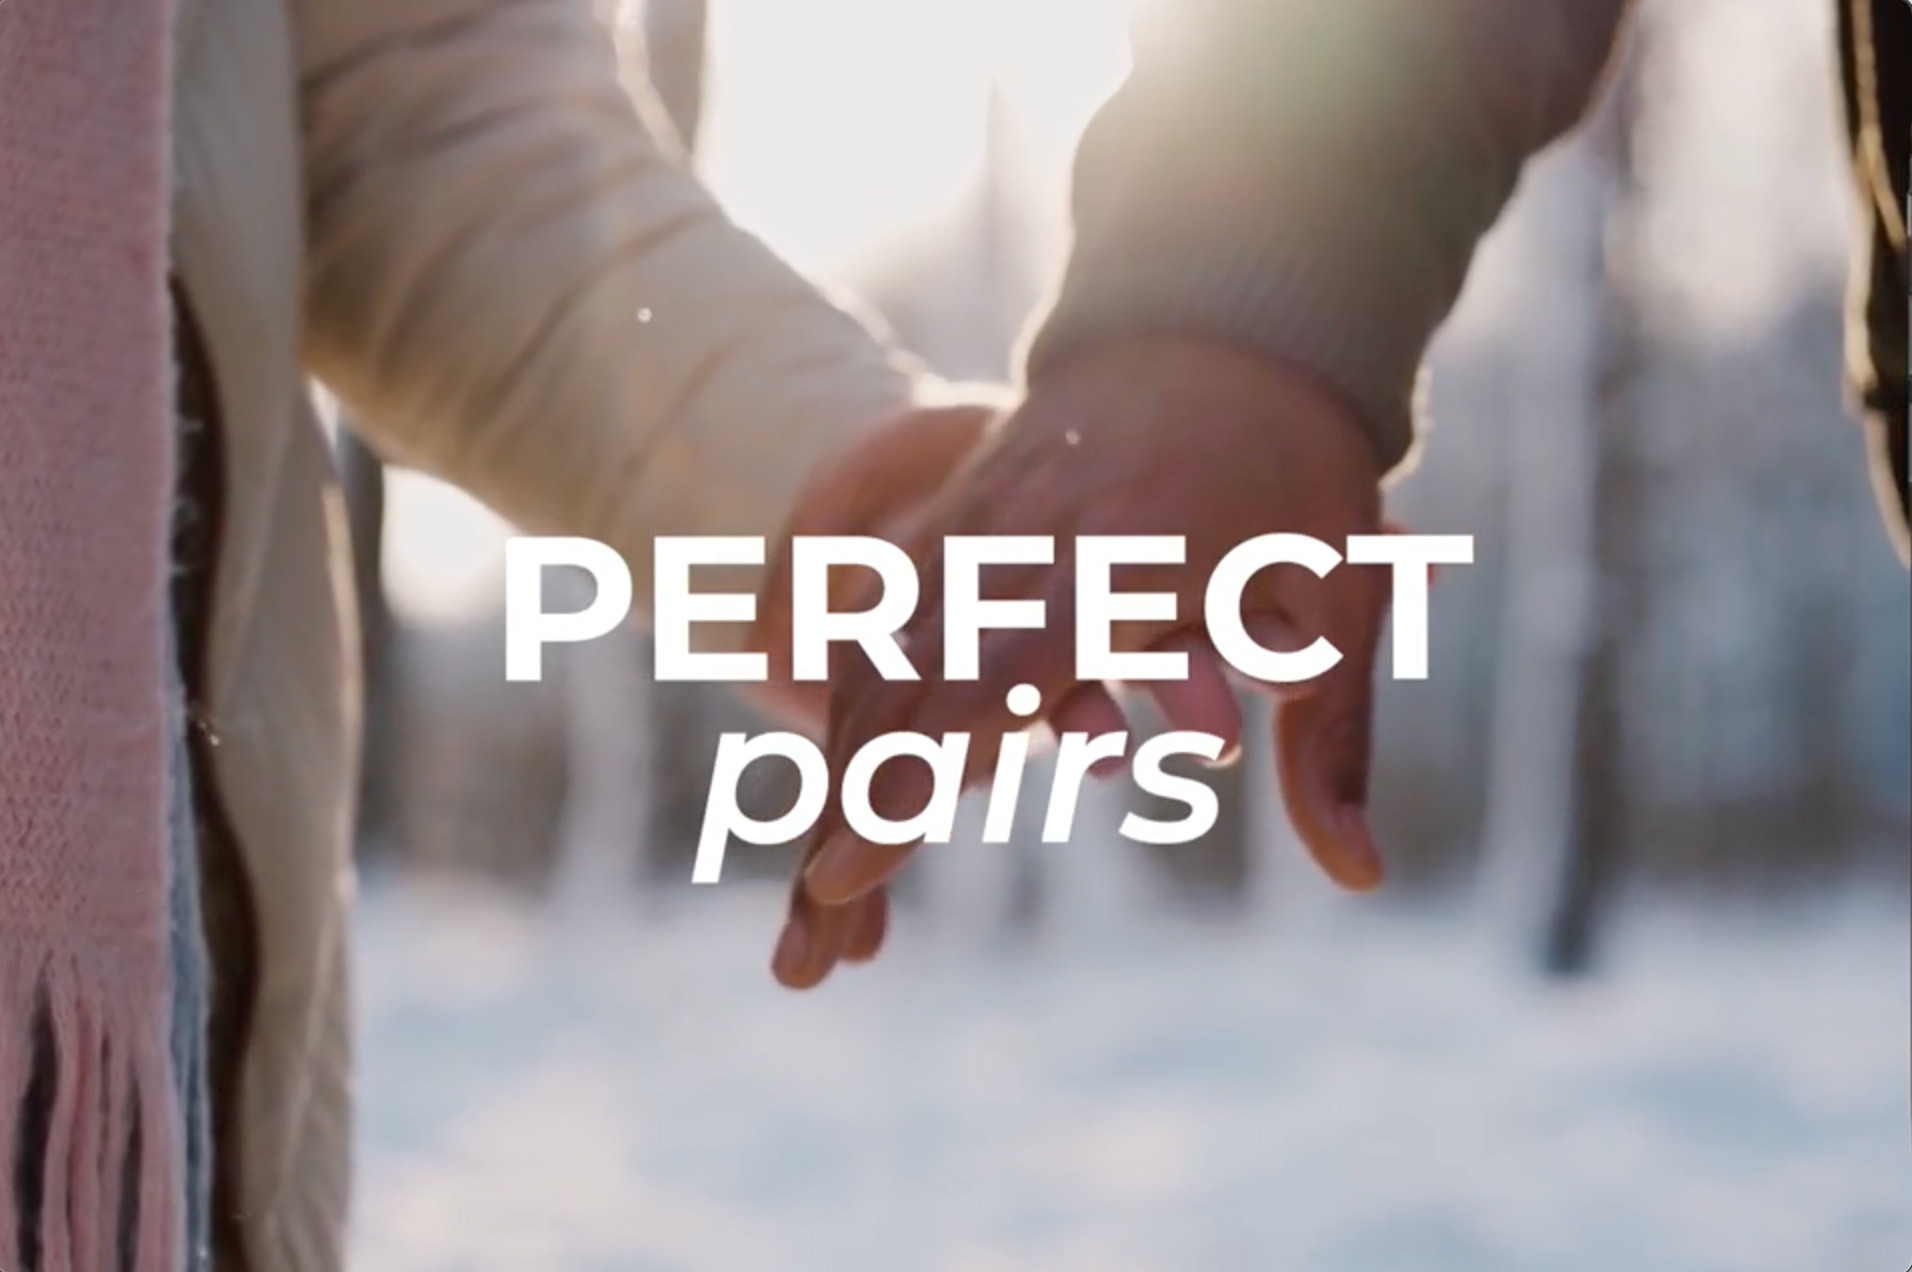 a video presenting a collaboration between tinder and happy socks. Thumbnail says 'perfect pairs' in white over a close up image of holding hands.